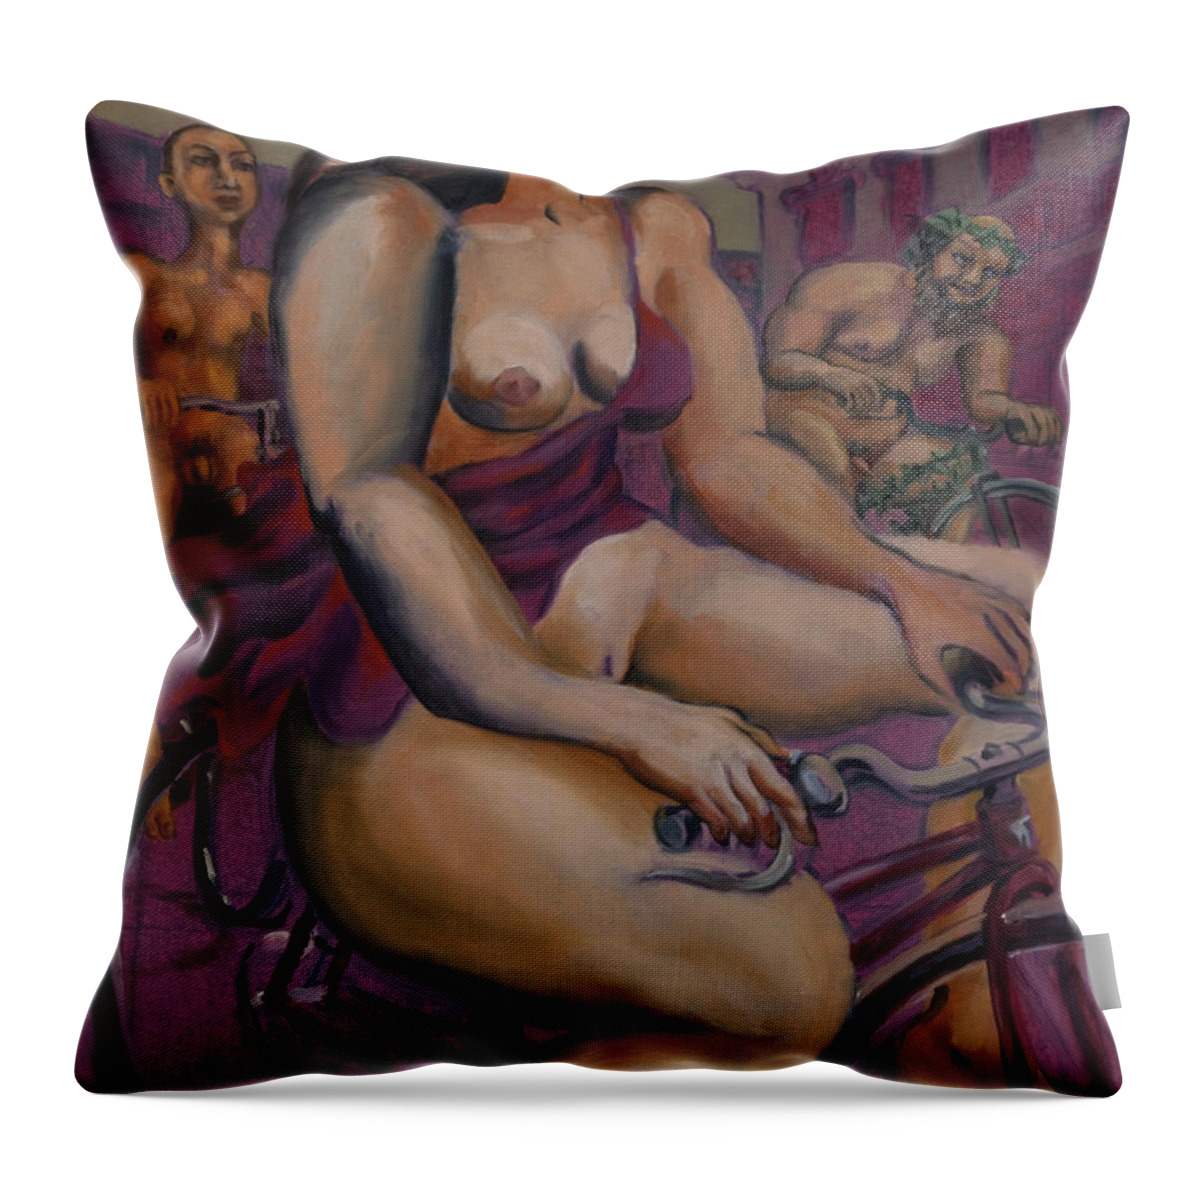 Nudes Throw Pillow featuring the painting Nude cyclists with Carracchi Bacchus by Peregrine Roskilly